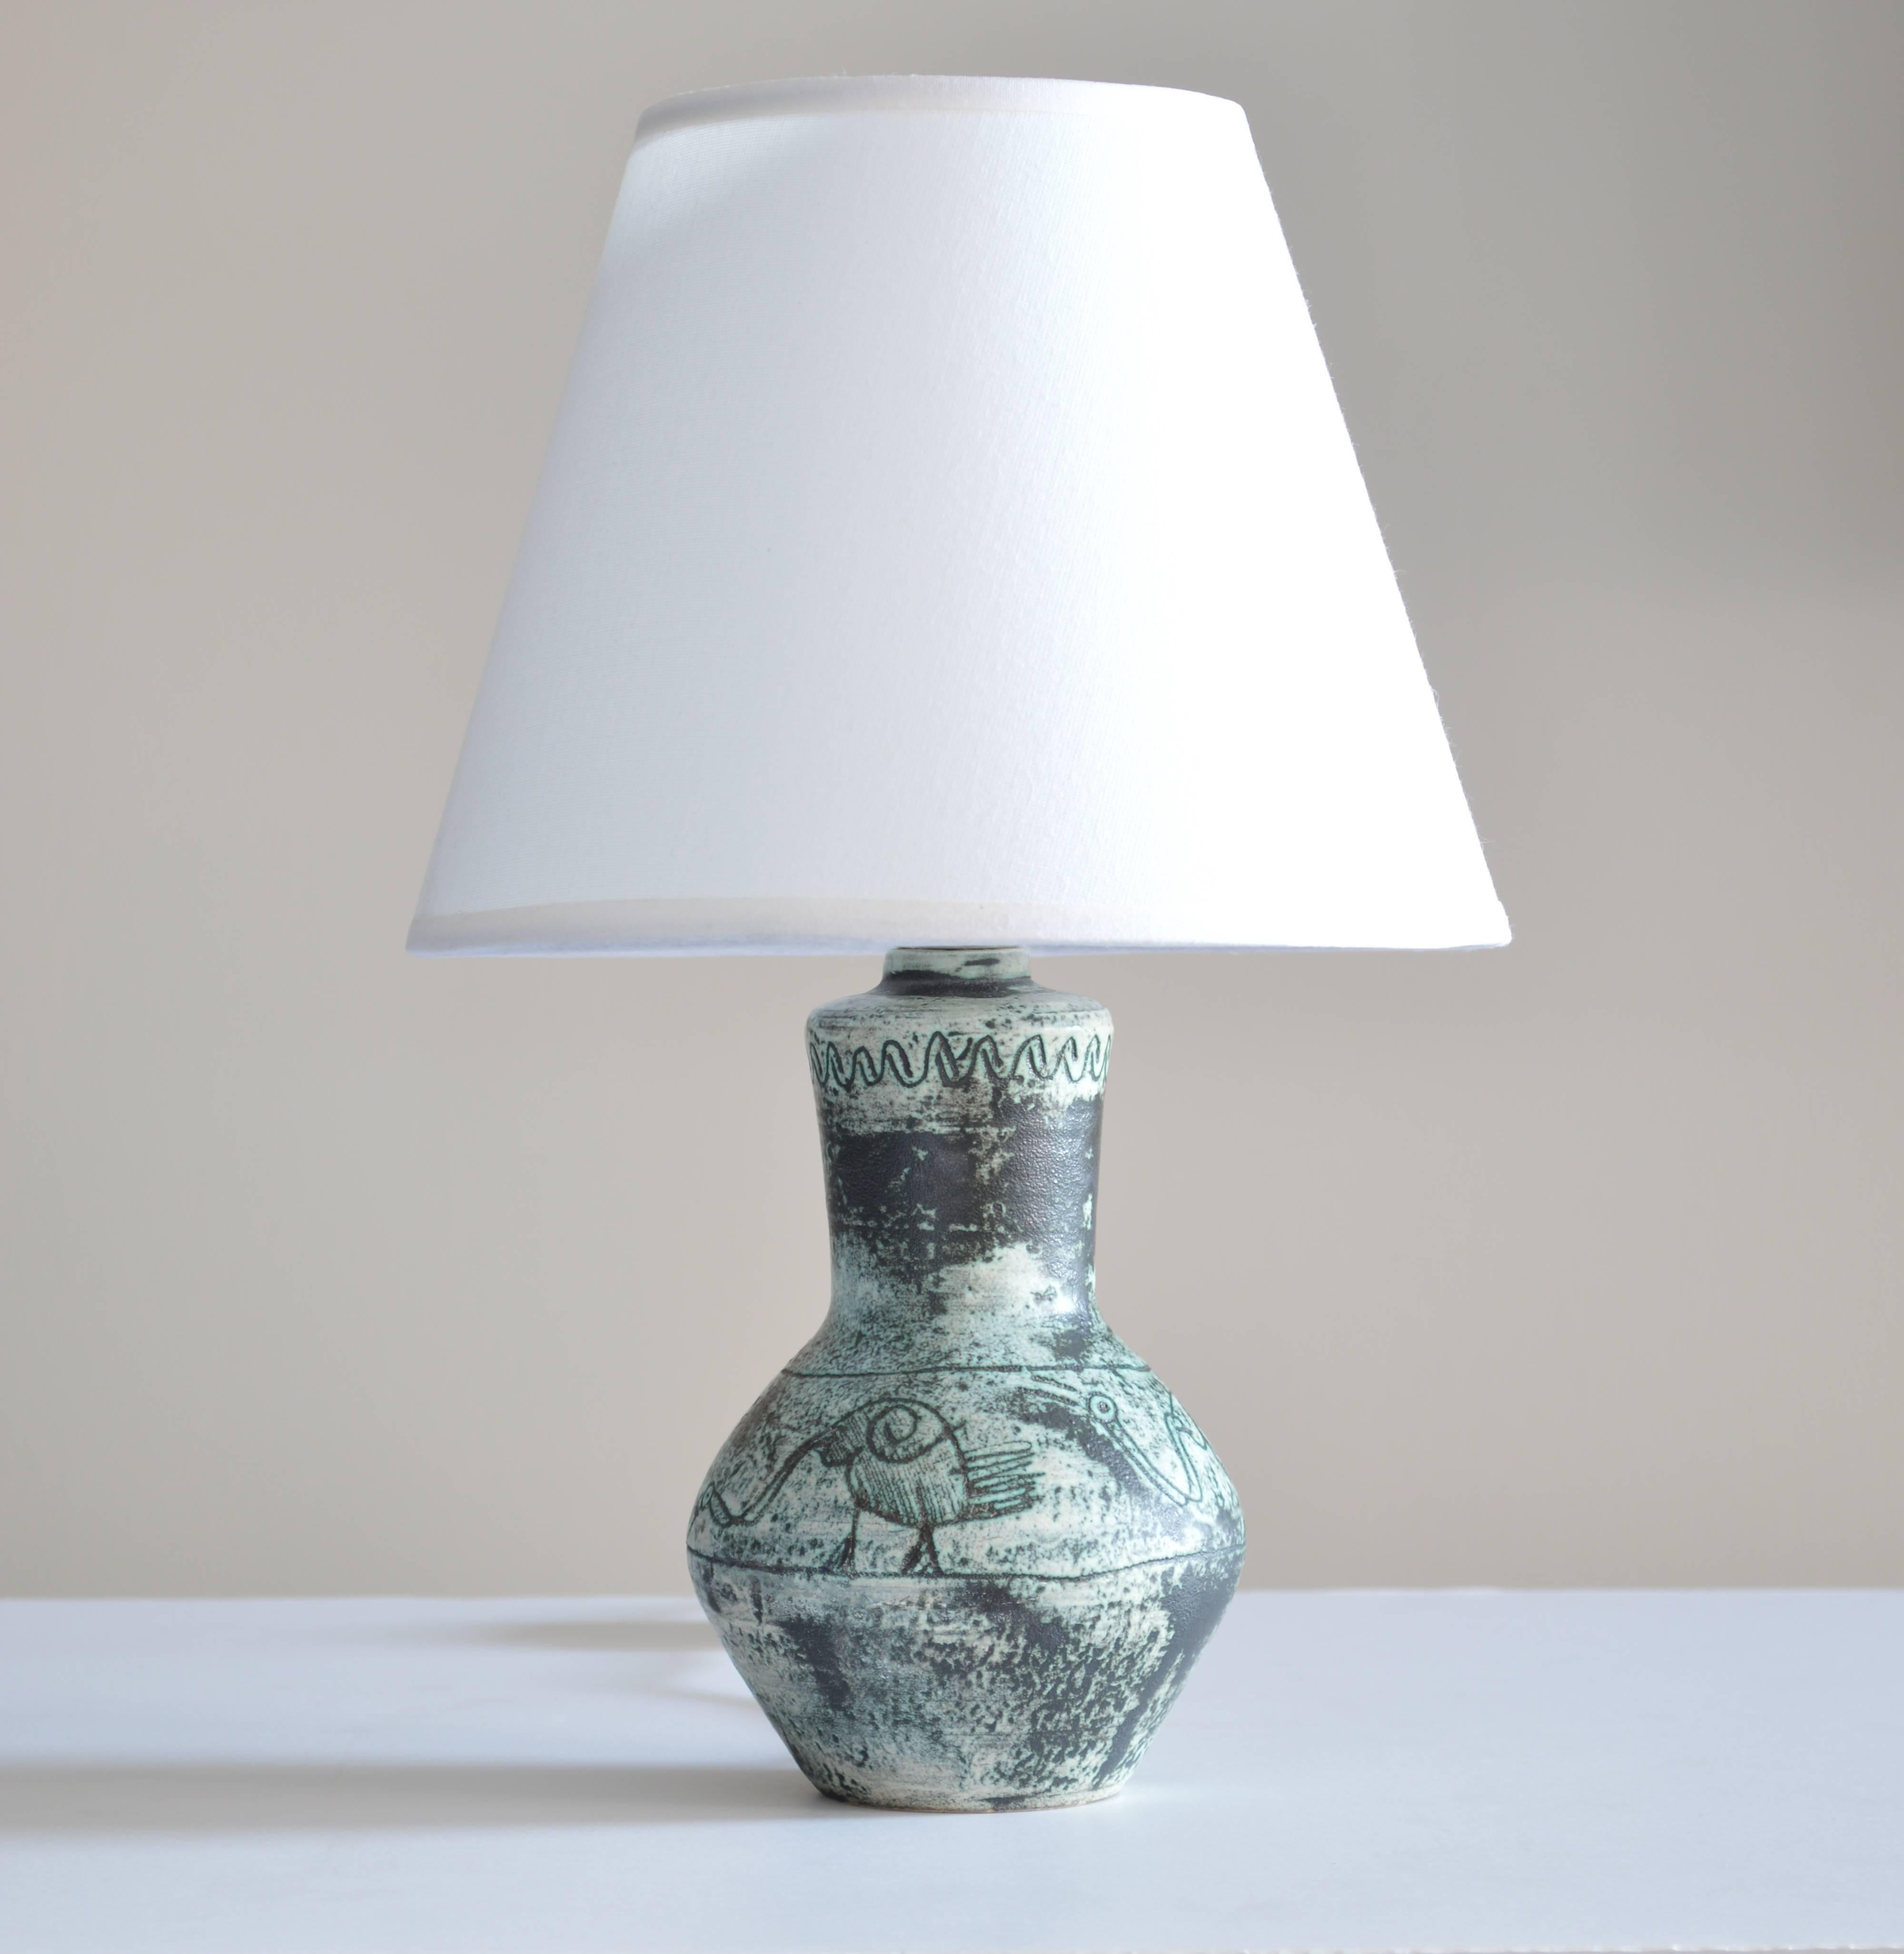 Petite Jacques Blin table lamp with mottled glaze and decorative etchings. Base diameter is 2.5